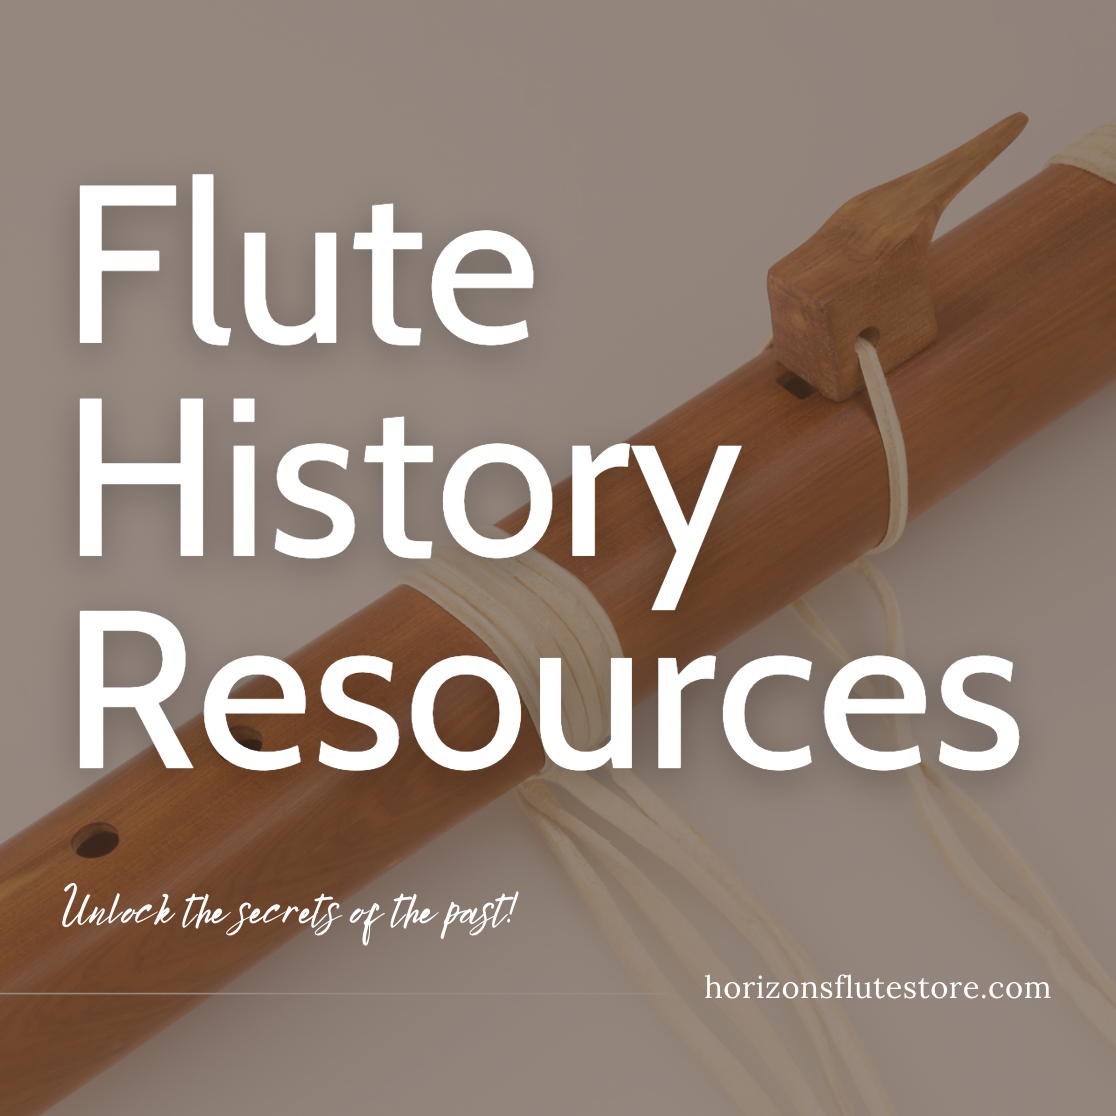 Flute History Resources